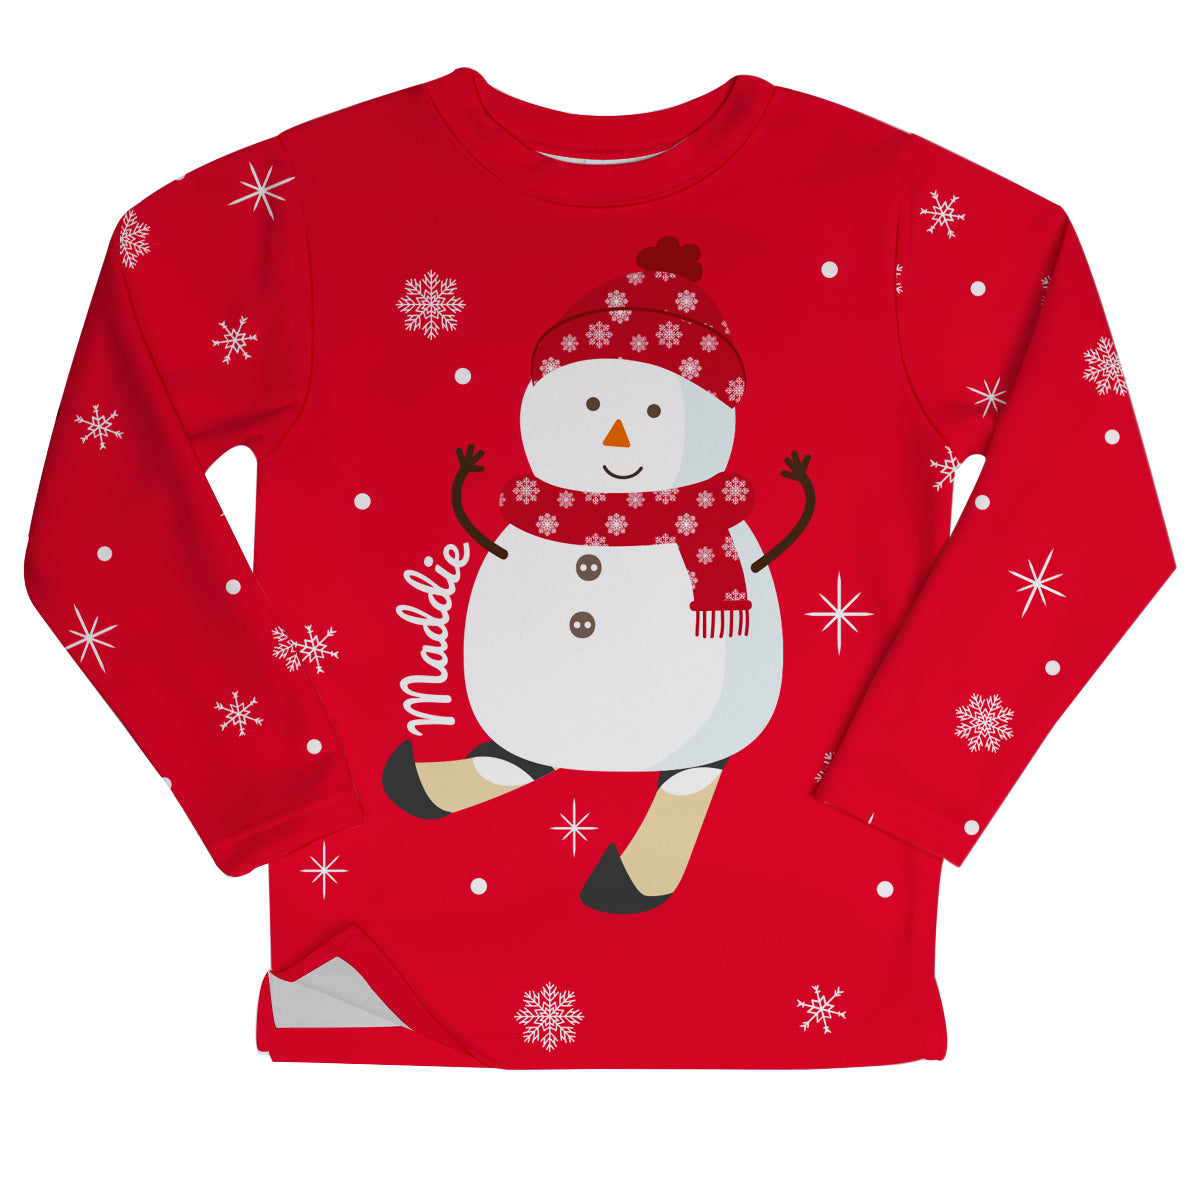 Girls red fleece sweatshirt with snowman and name - Wimziy&Co.